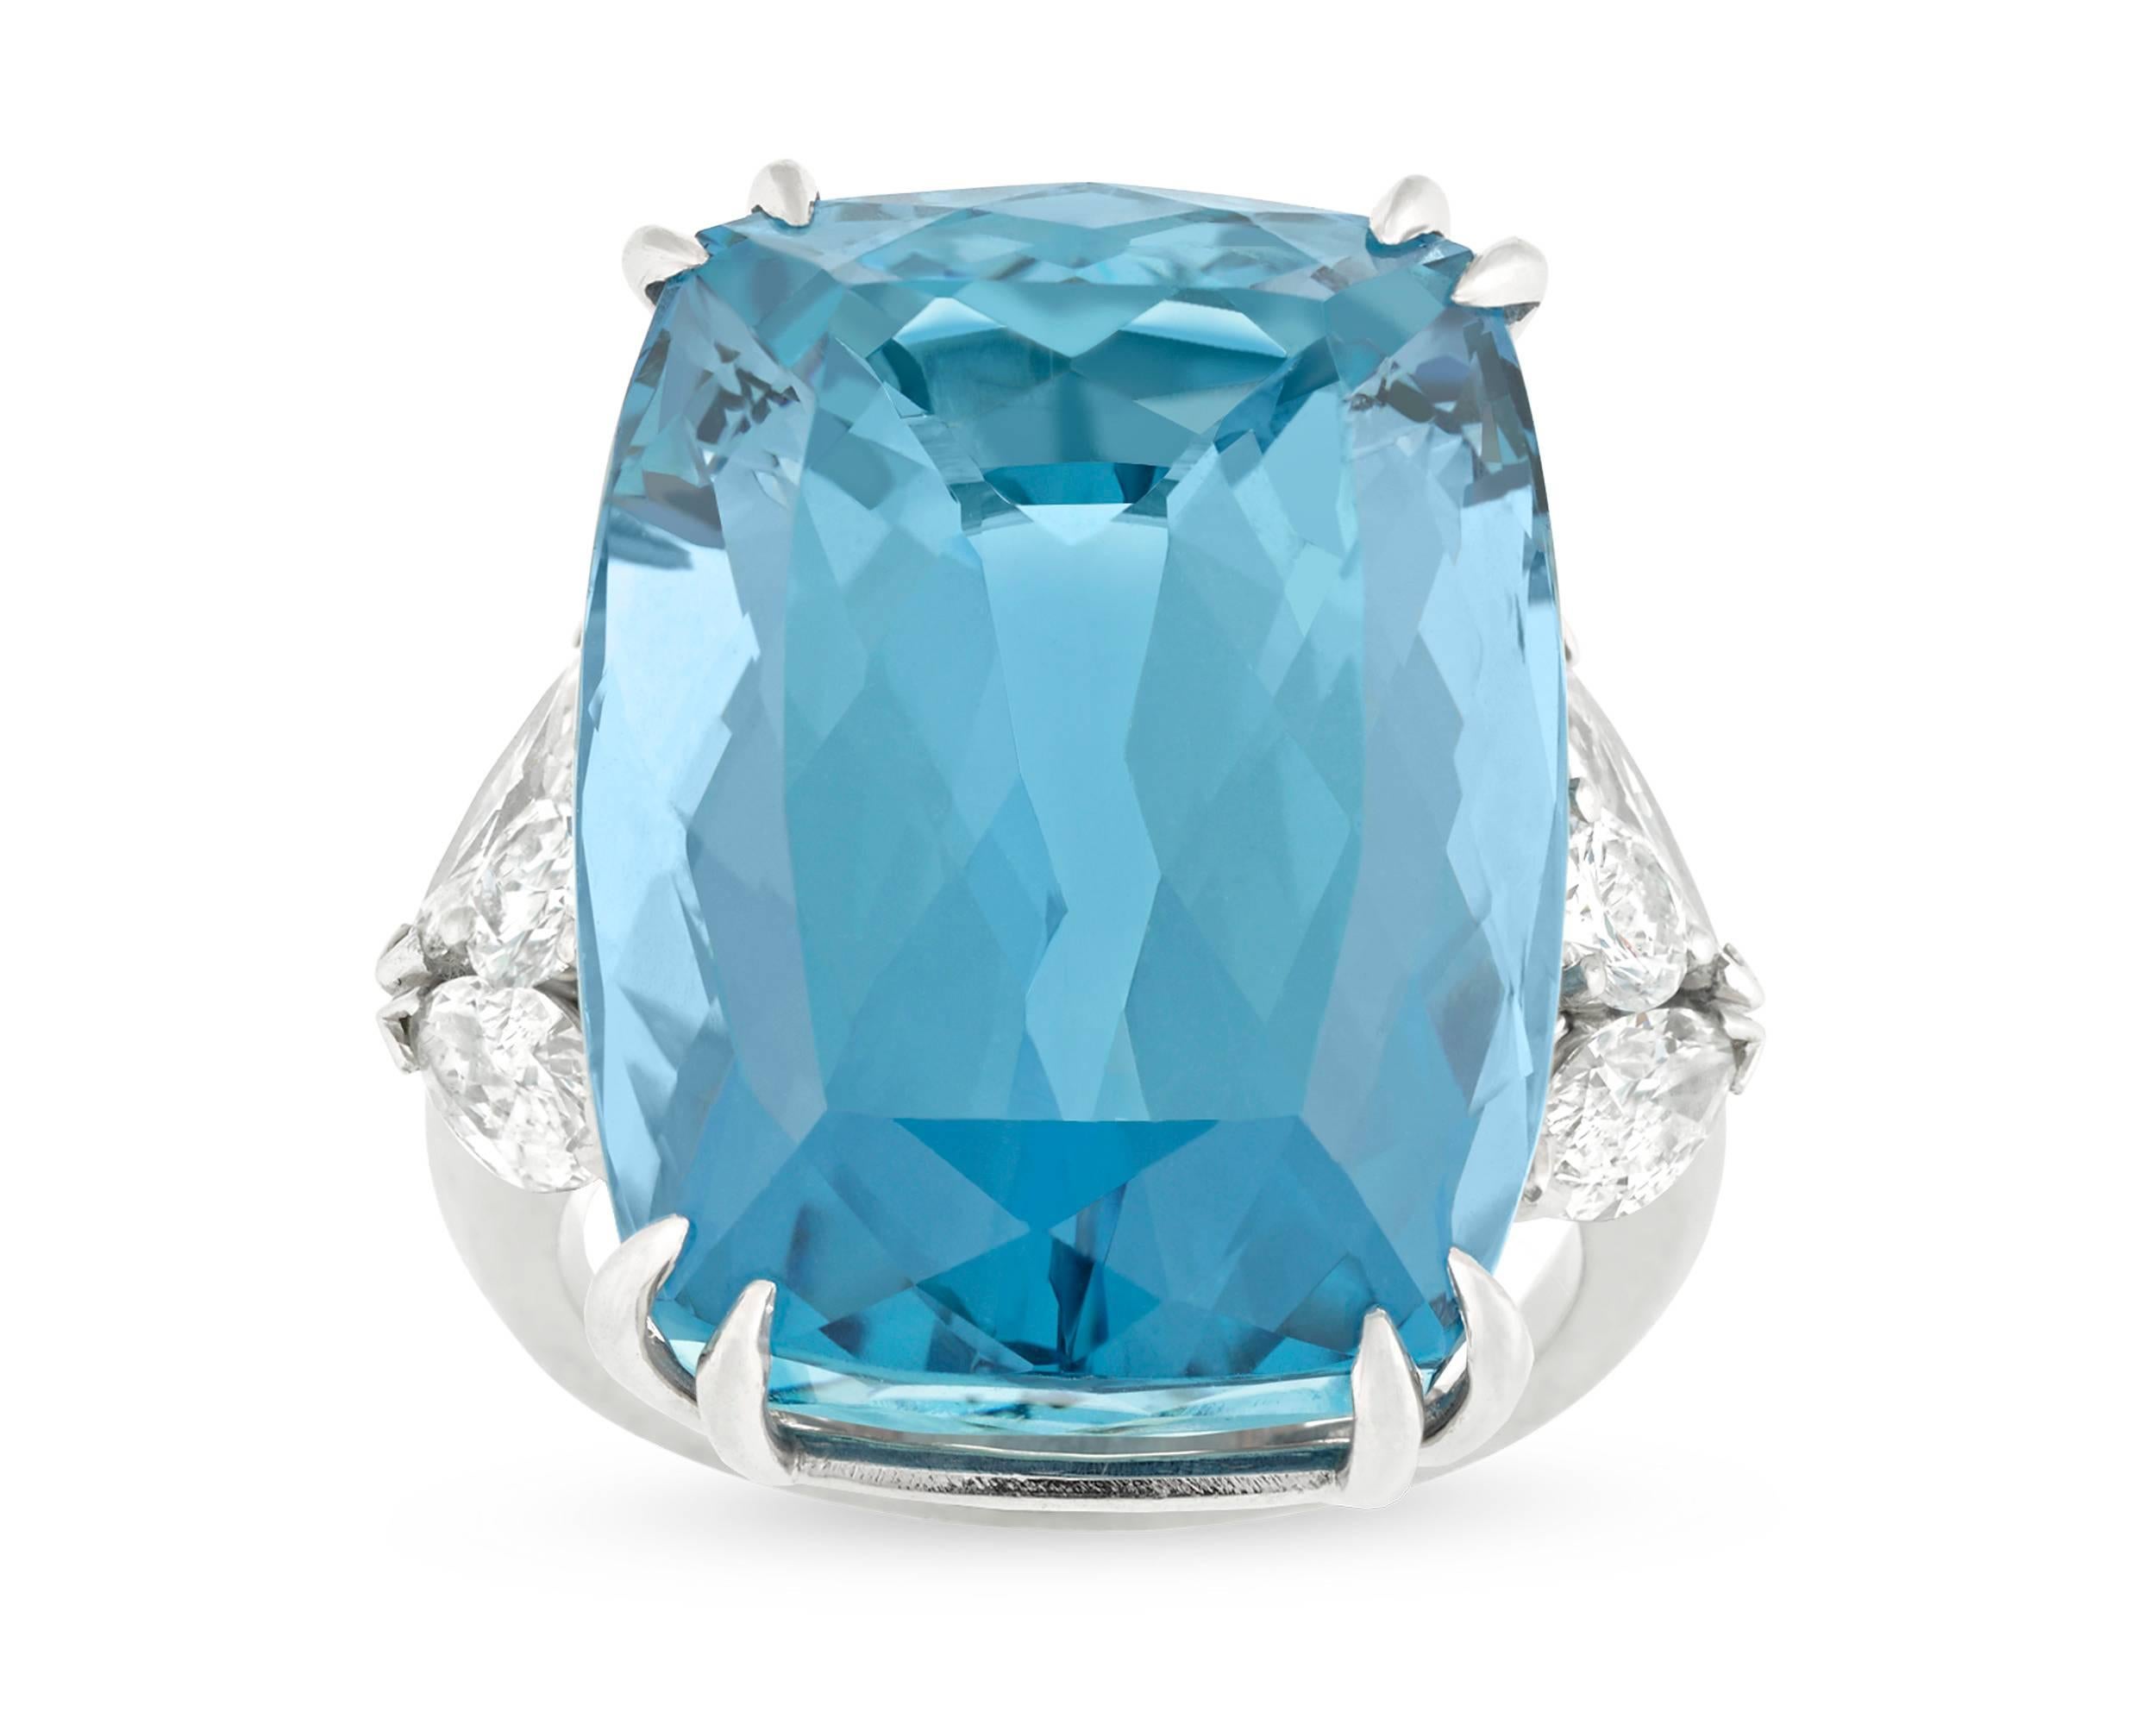 With the stunning blue hue of a clear tropical ocean, the incredible 34.11-carat aquamarine at the center of this Van Cleef & Arpels ring is captivating. With a name derived from the Latin for 